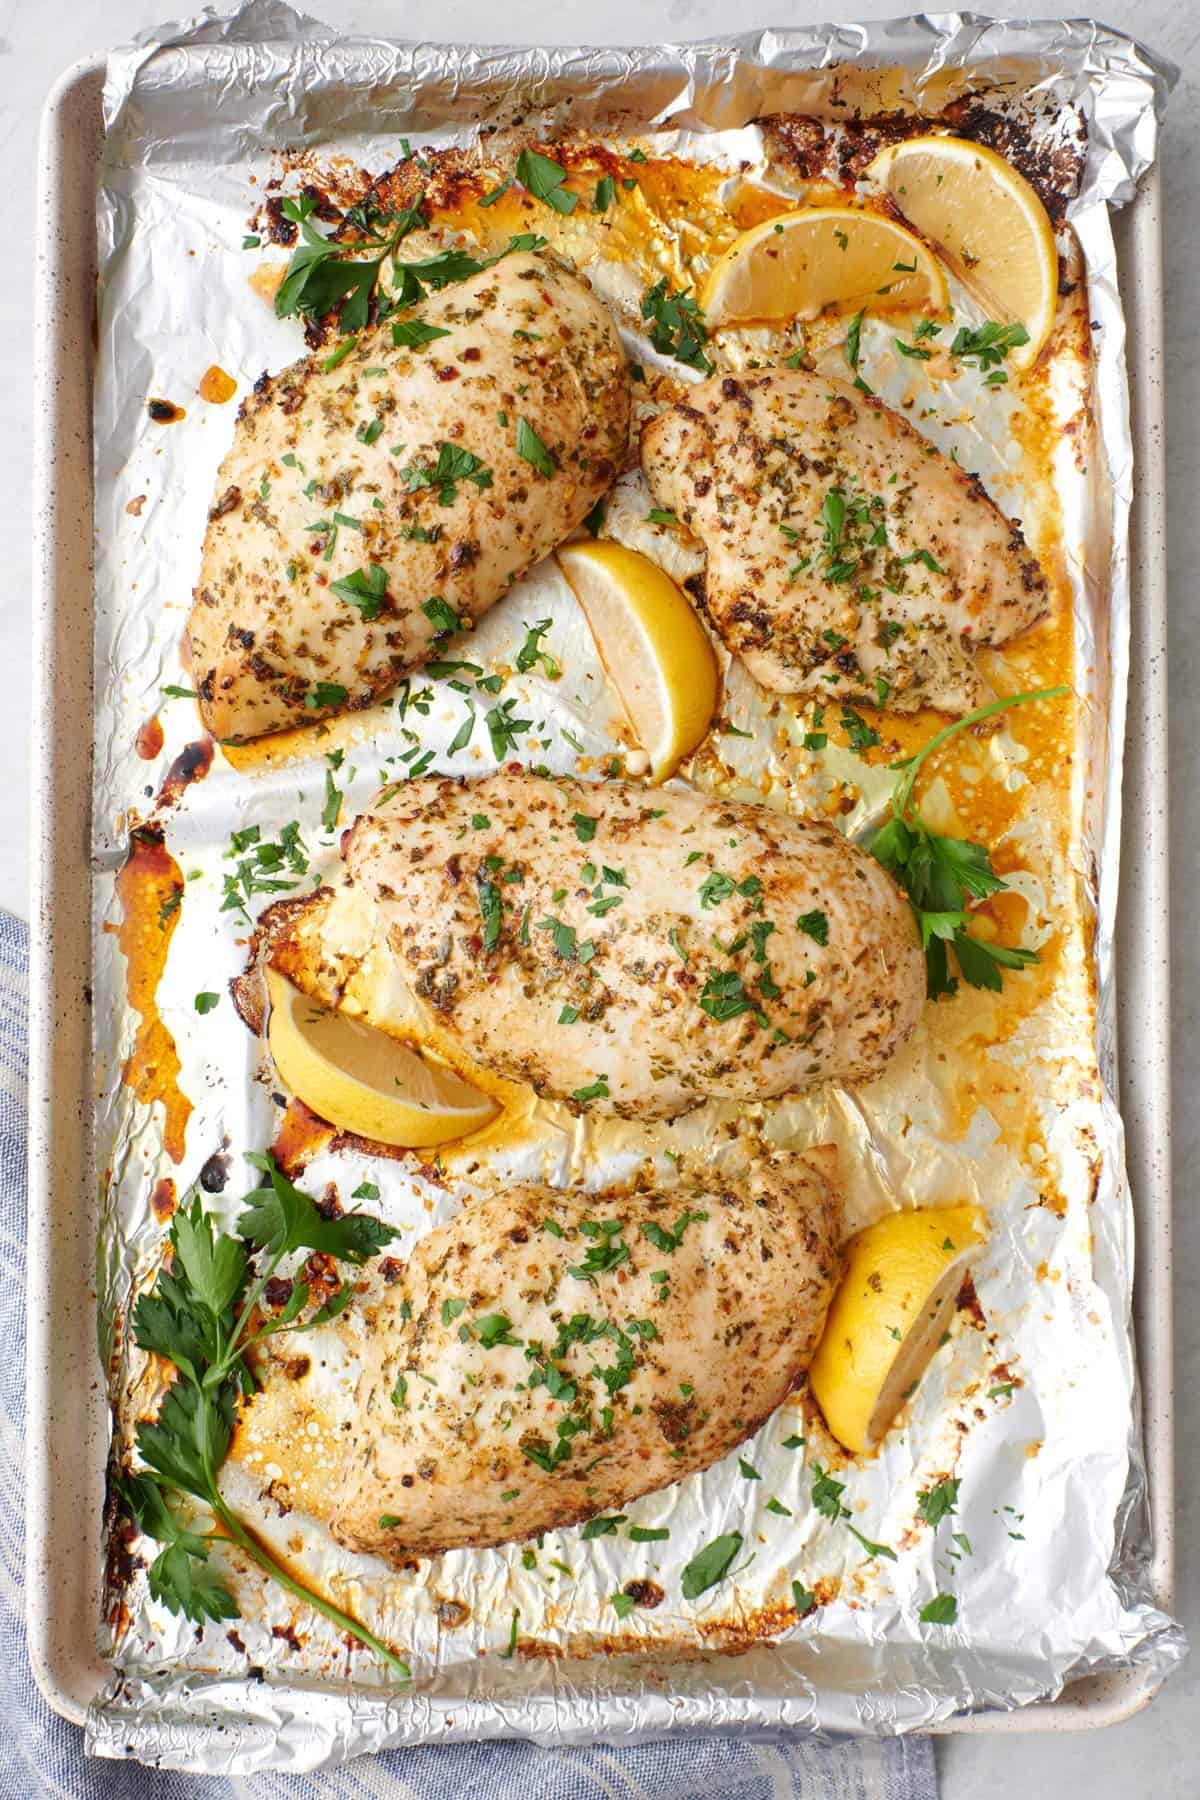 Sheet pan lemon garlic chicken breasts on a foil lined cooking sheet, garnished with fresh parsley and lemon wedges.